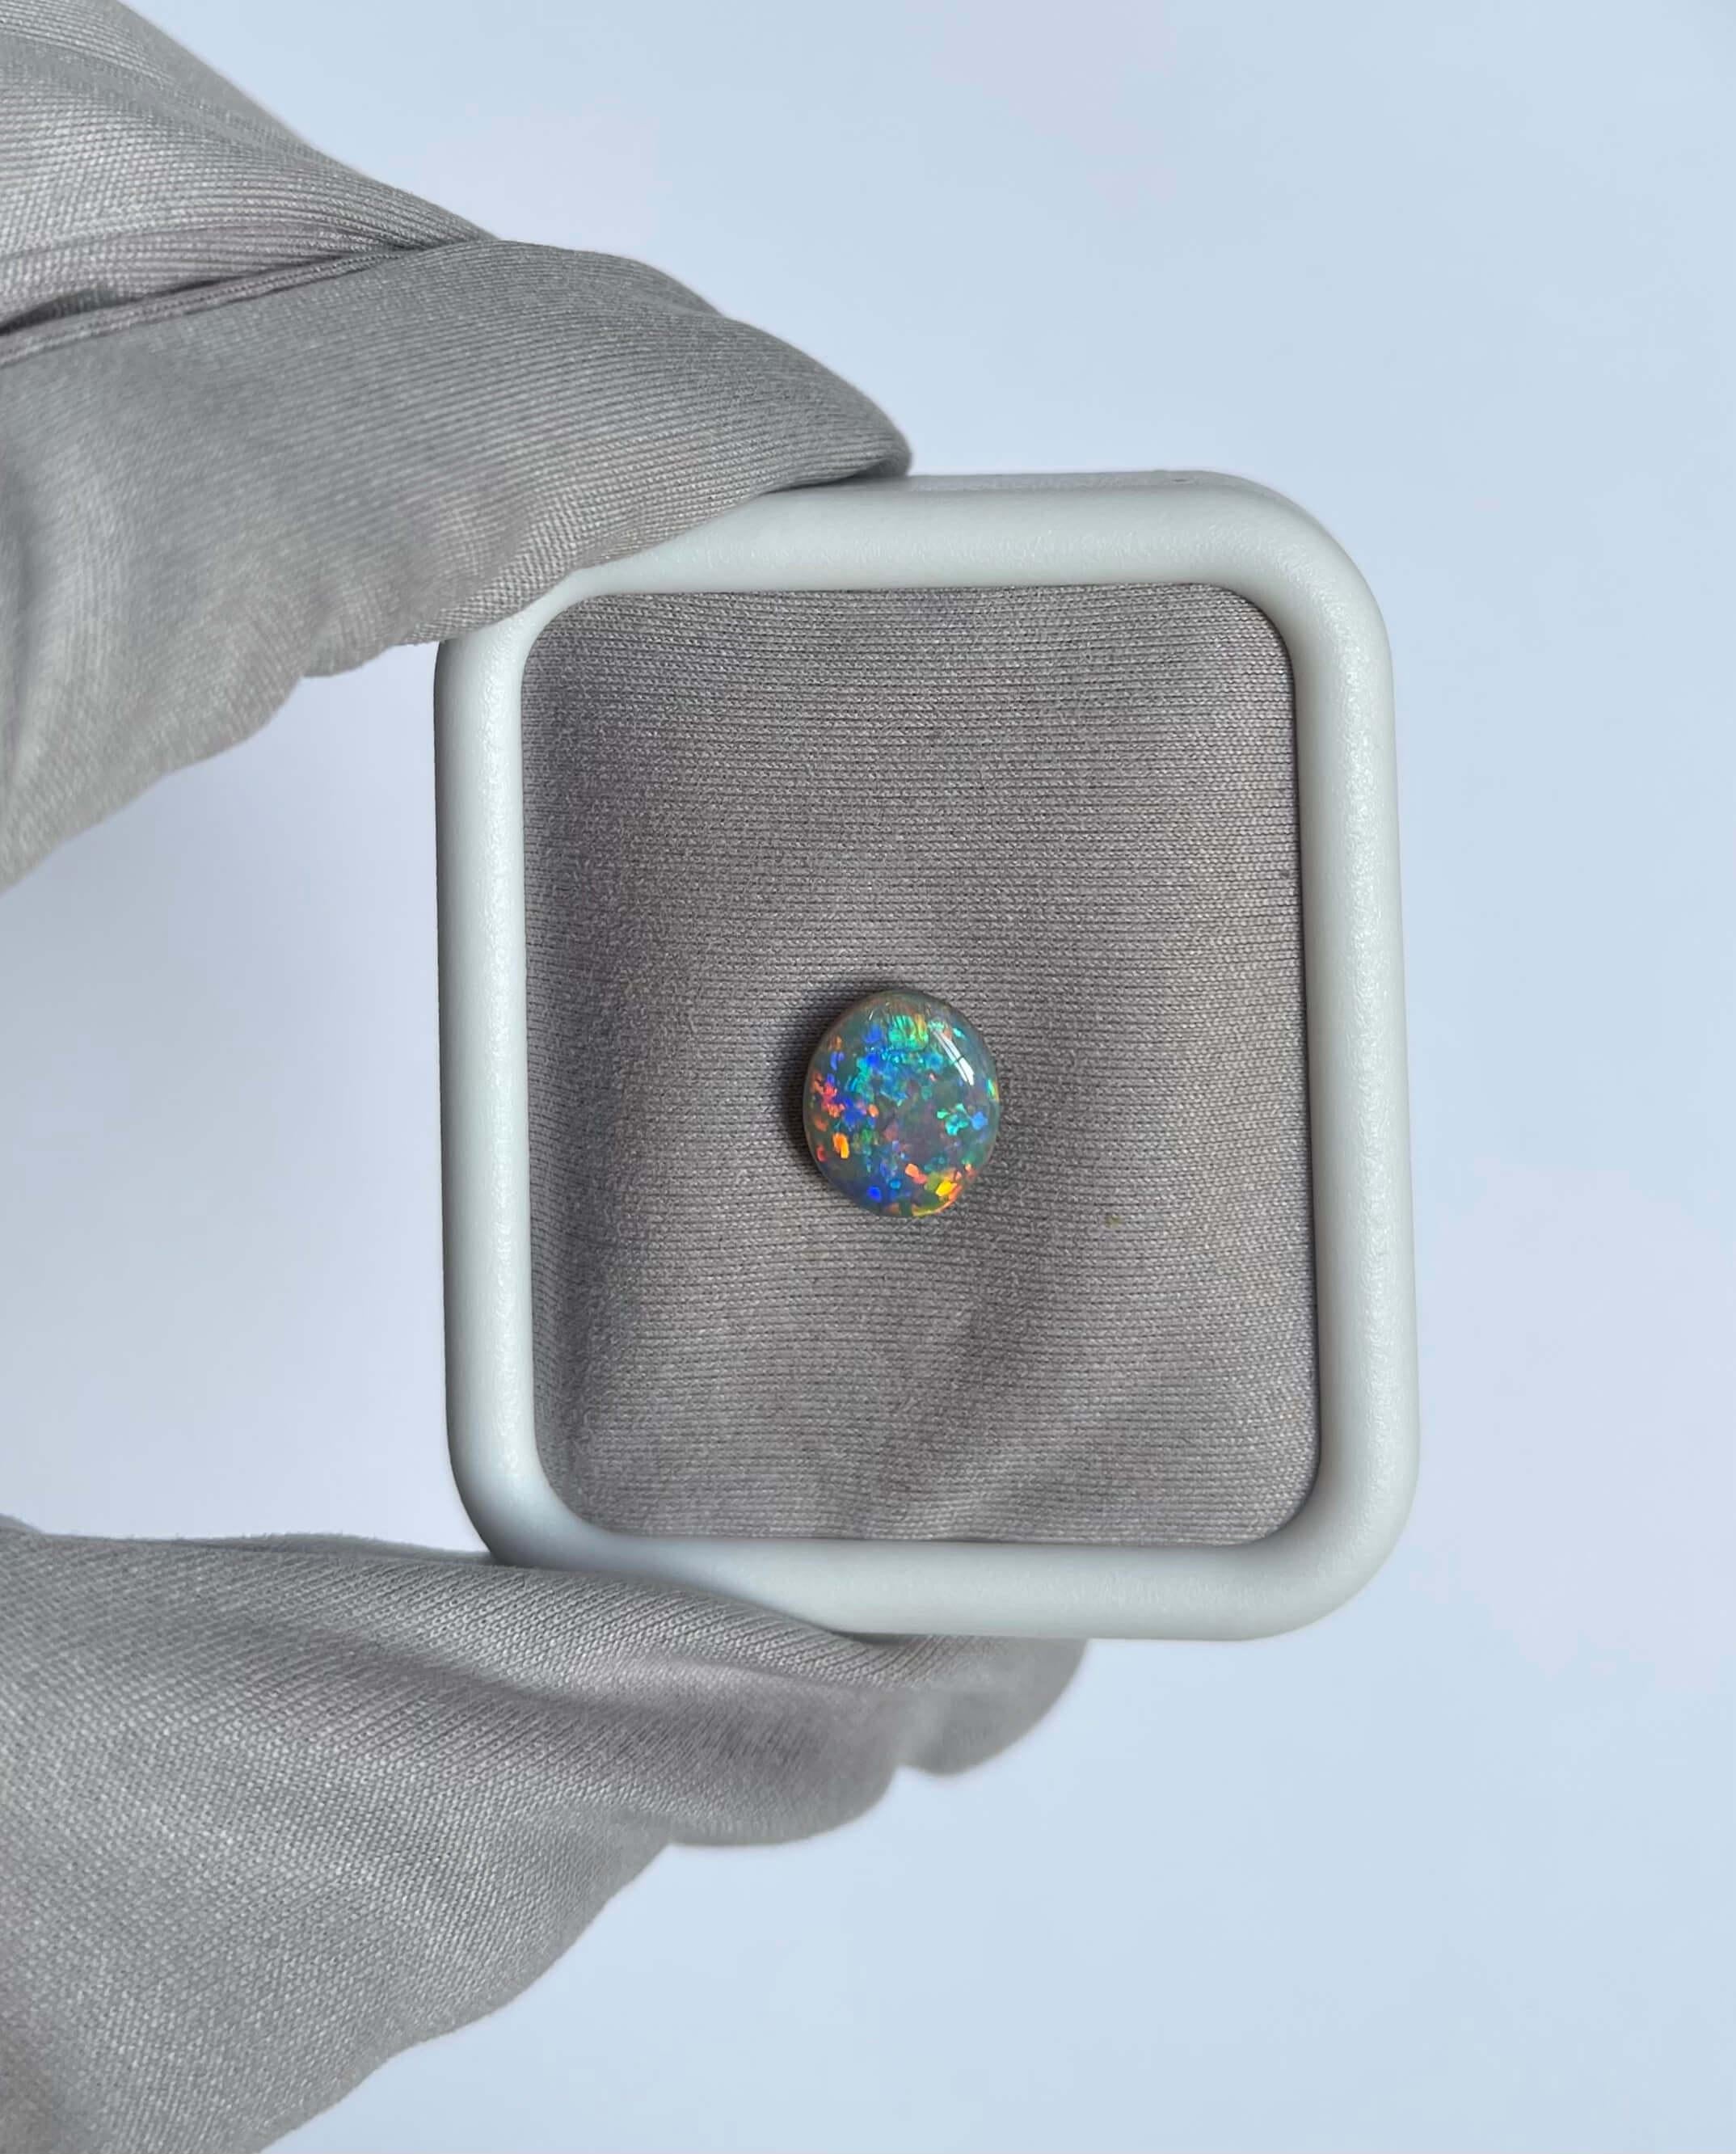 Australia is the birthplace of the most beautiful precious opal gemstones in the world. Fine Australian opals mesmerise with colours changing and shifting the gem moves with an unrivalled vibrancy. 

This opal was ethically sourced from Lightning